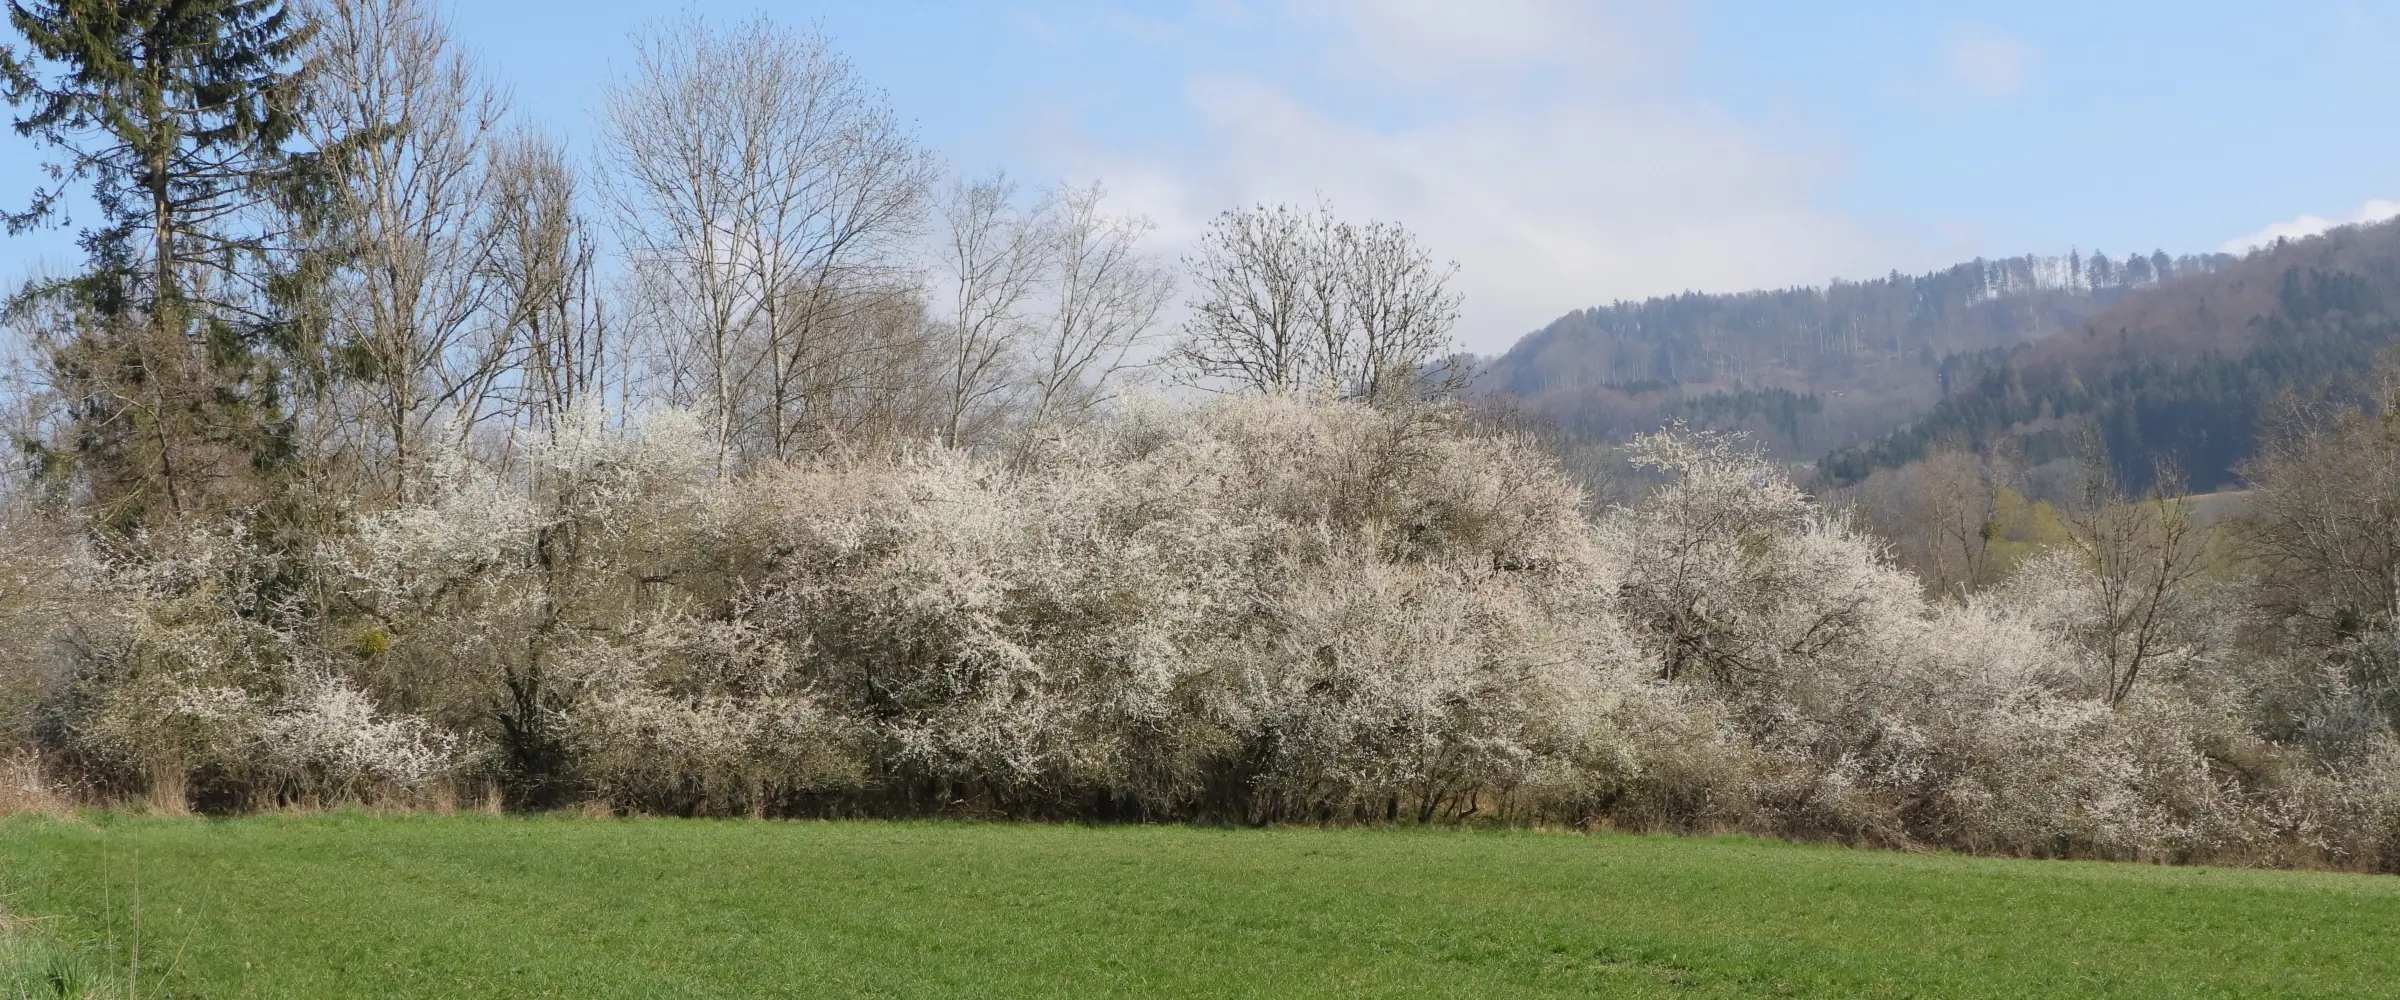 A hedge with blackthorn as the "tree-like plant". It can reach a height of up to 6 metres.